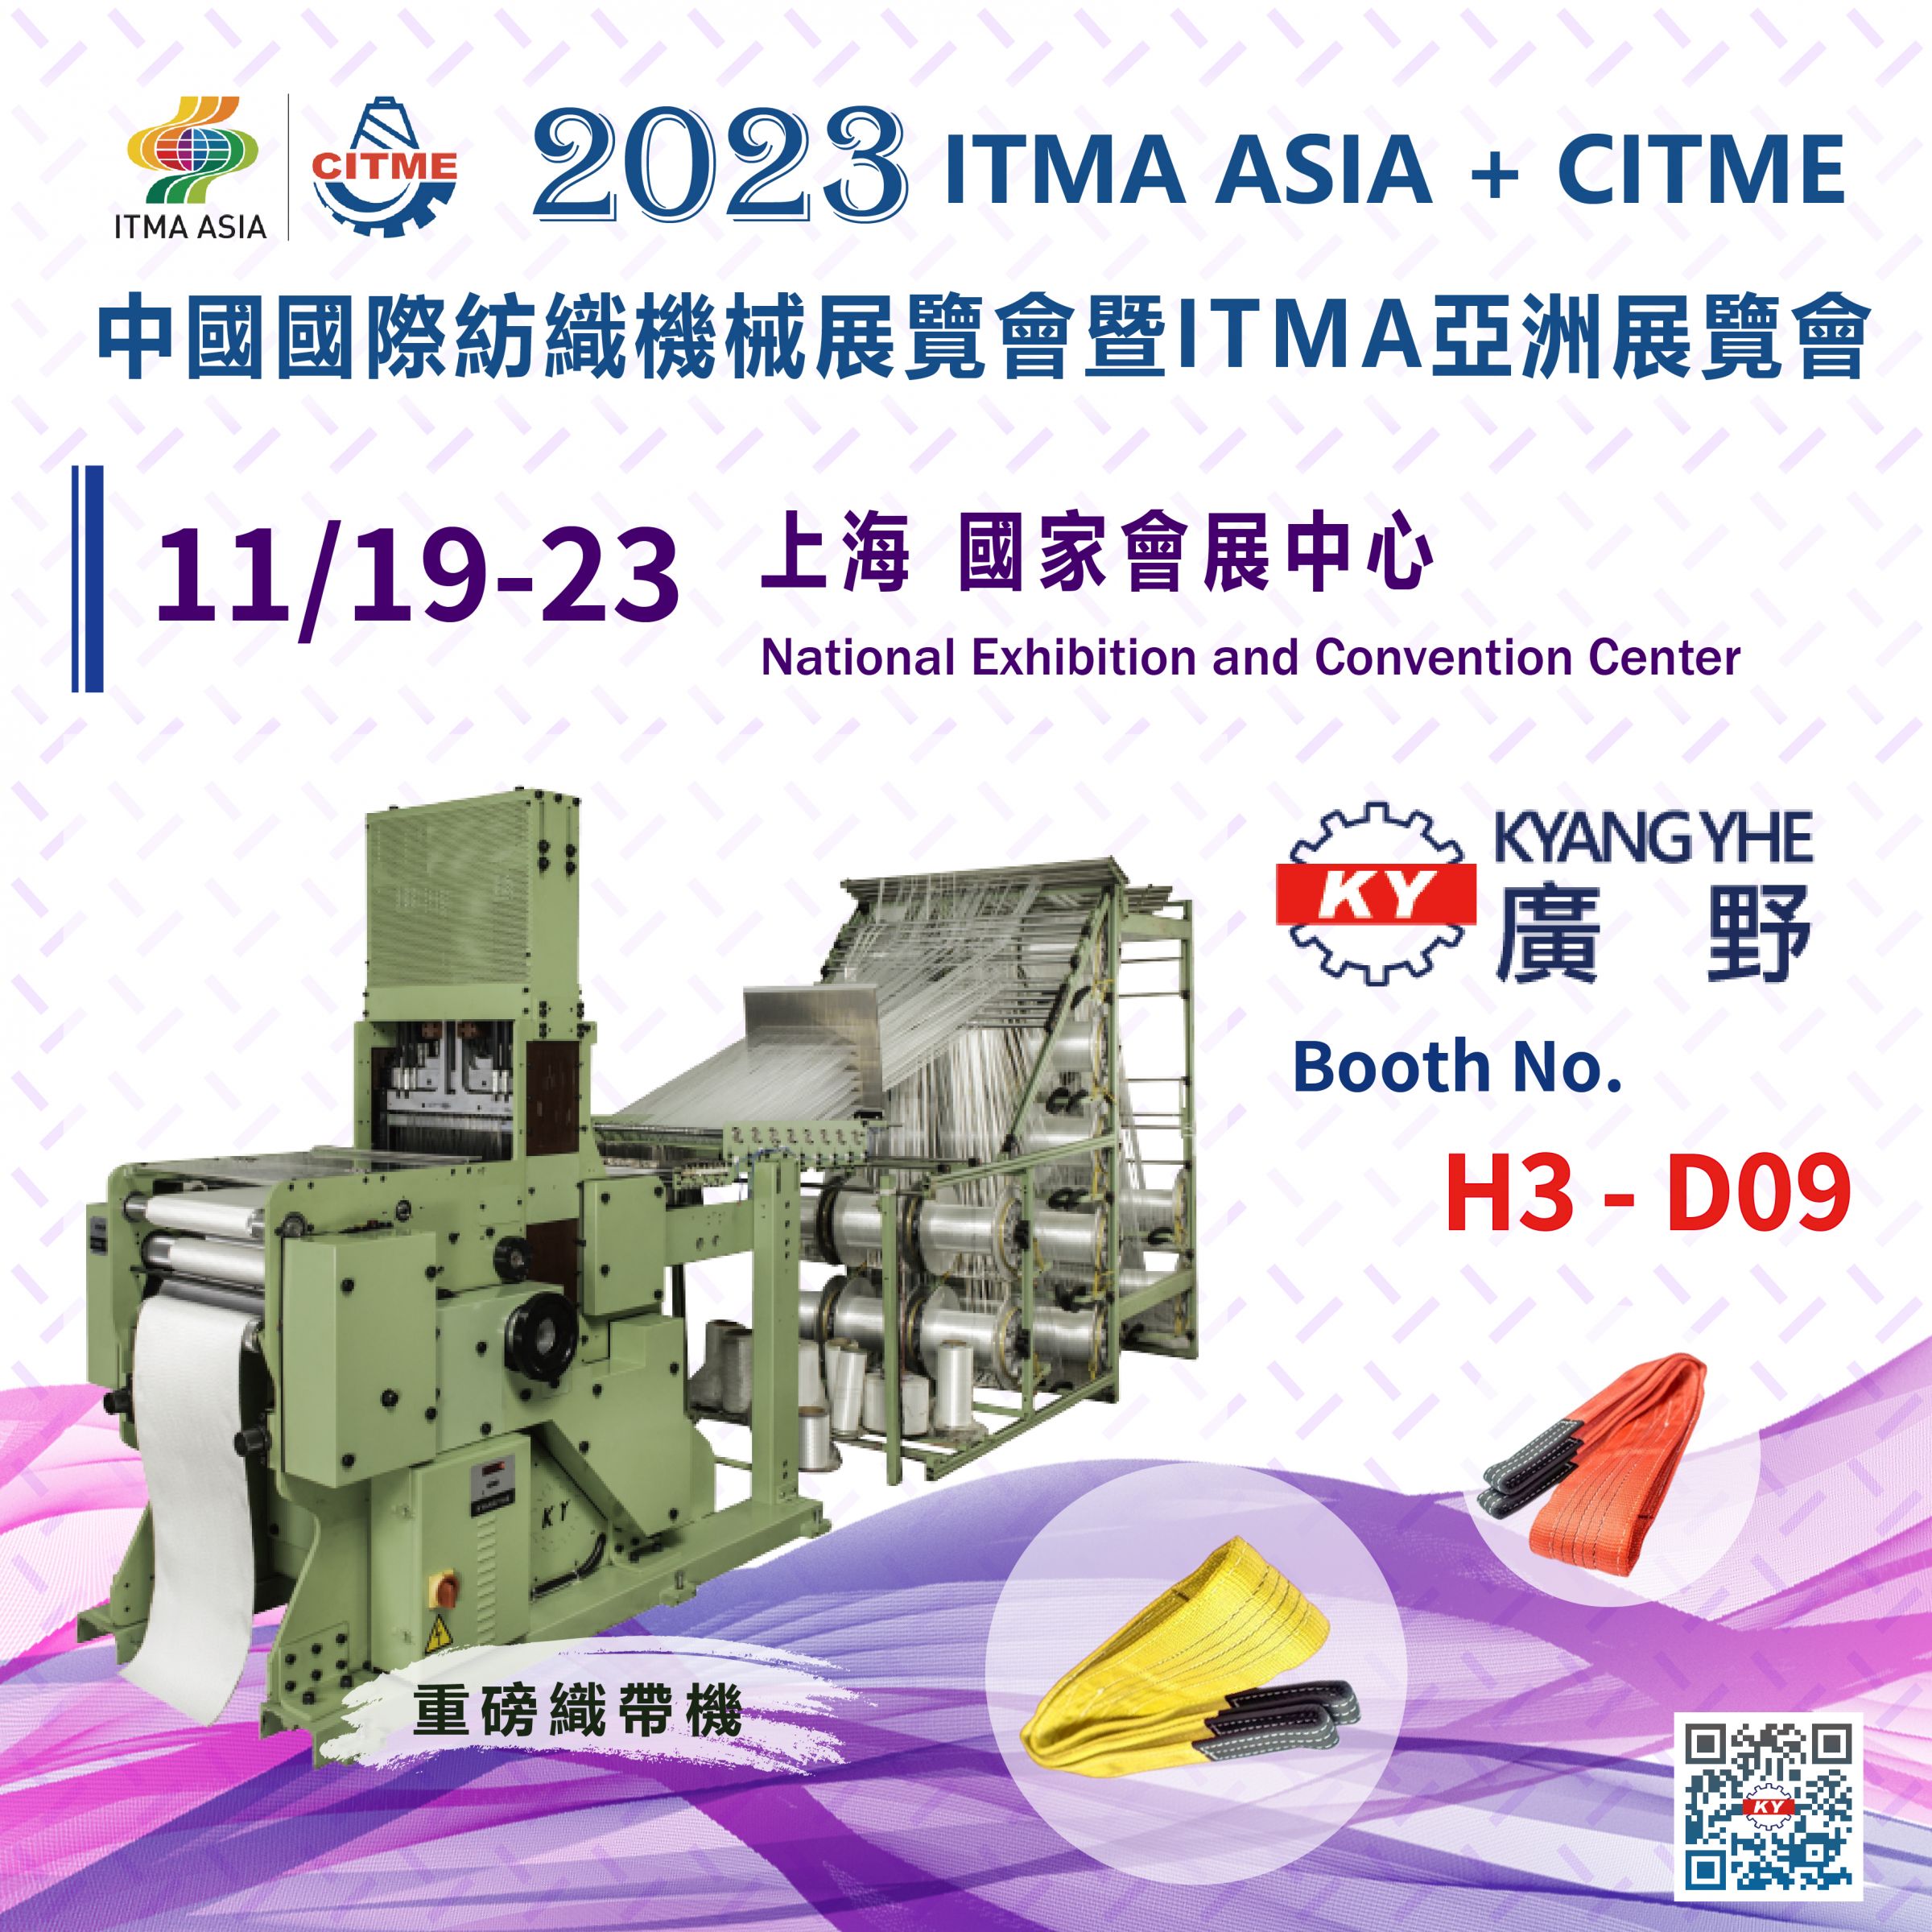 2023 ITMA ASIA + CITME in Shanghai, China